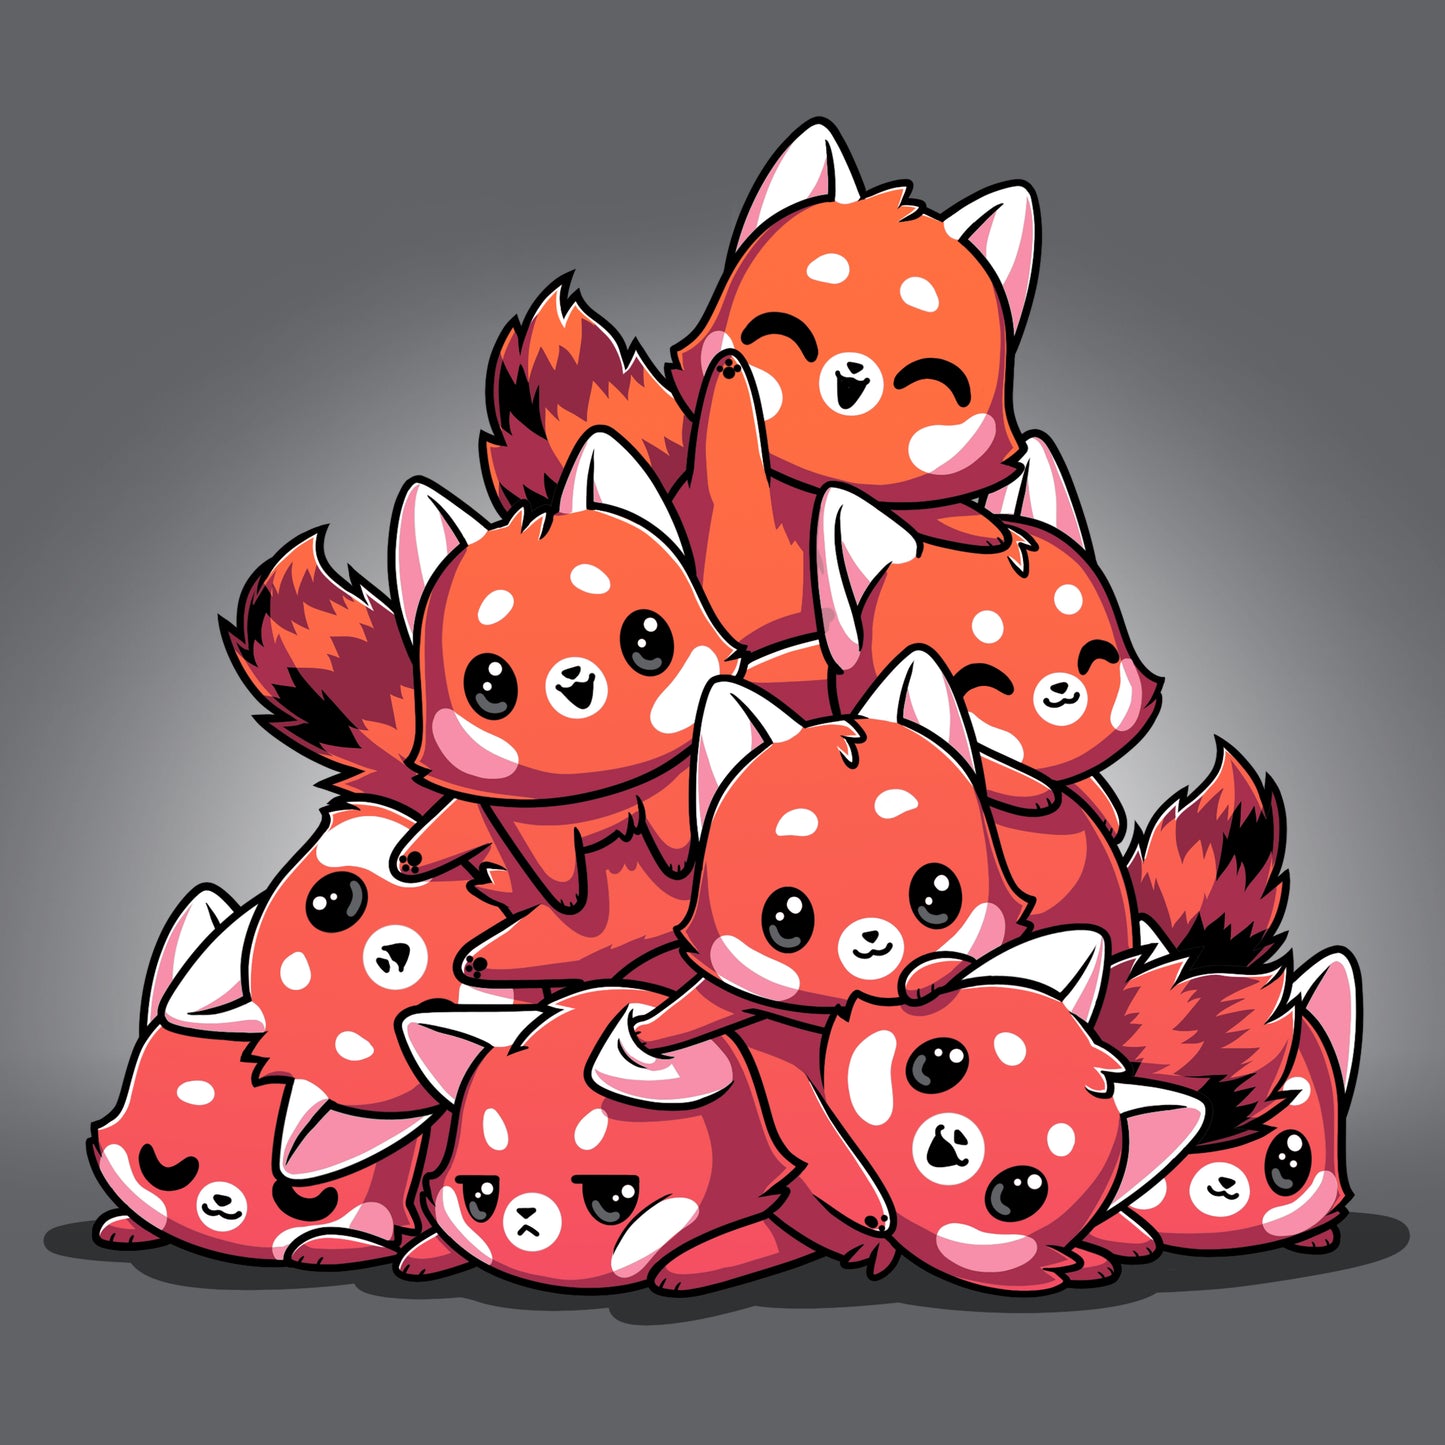 A Red Panda Pile of kawaii foxes on a charcoal gray background by TeeTurtle.